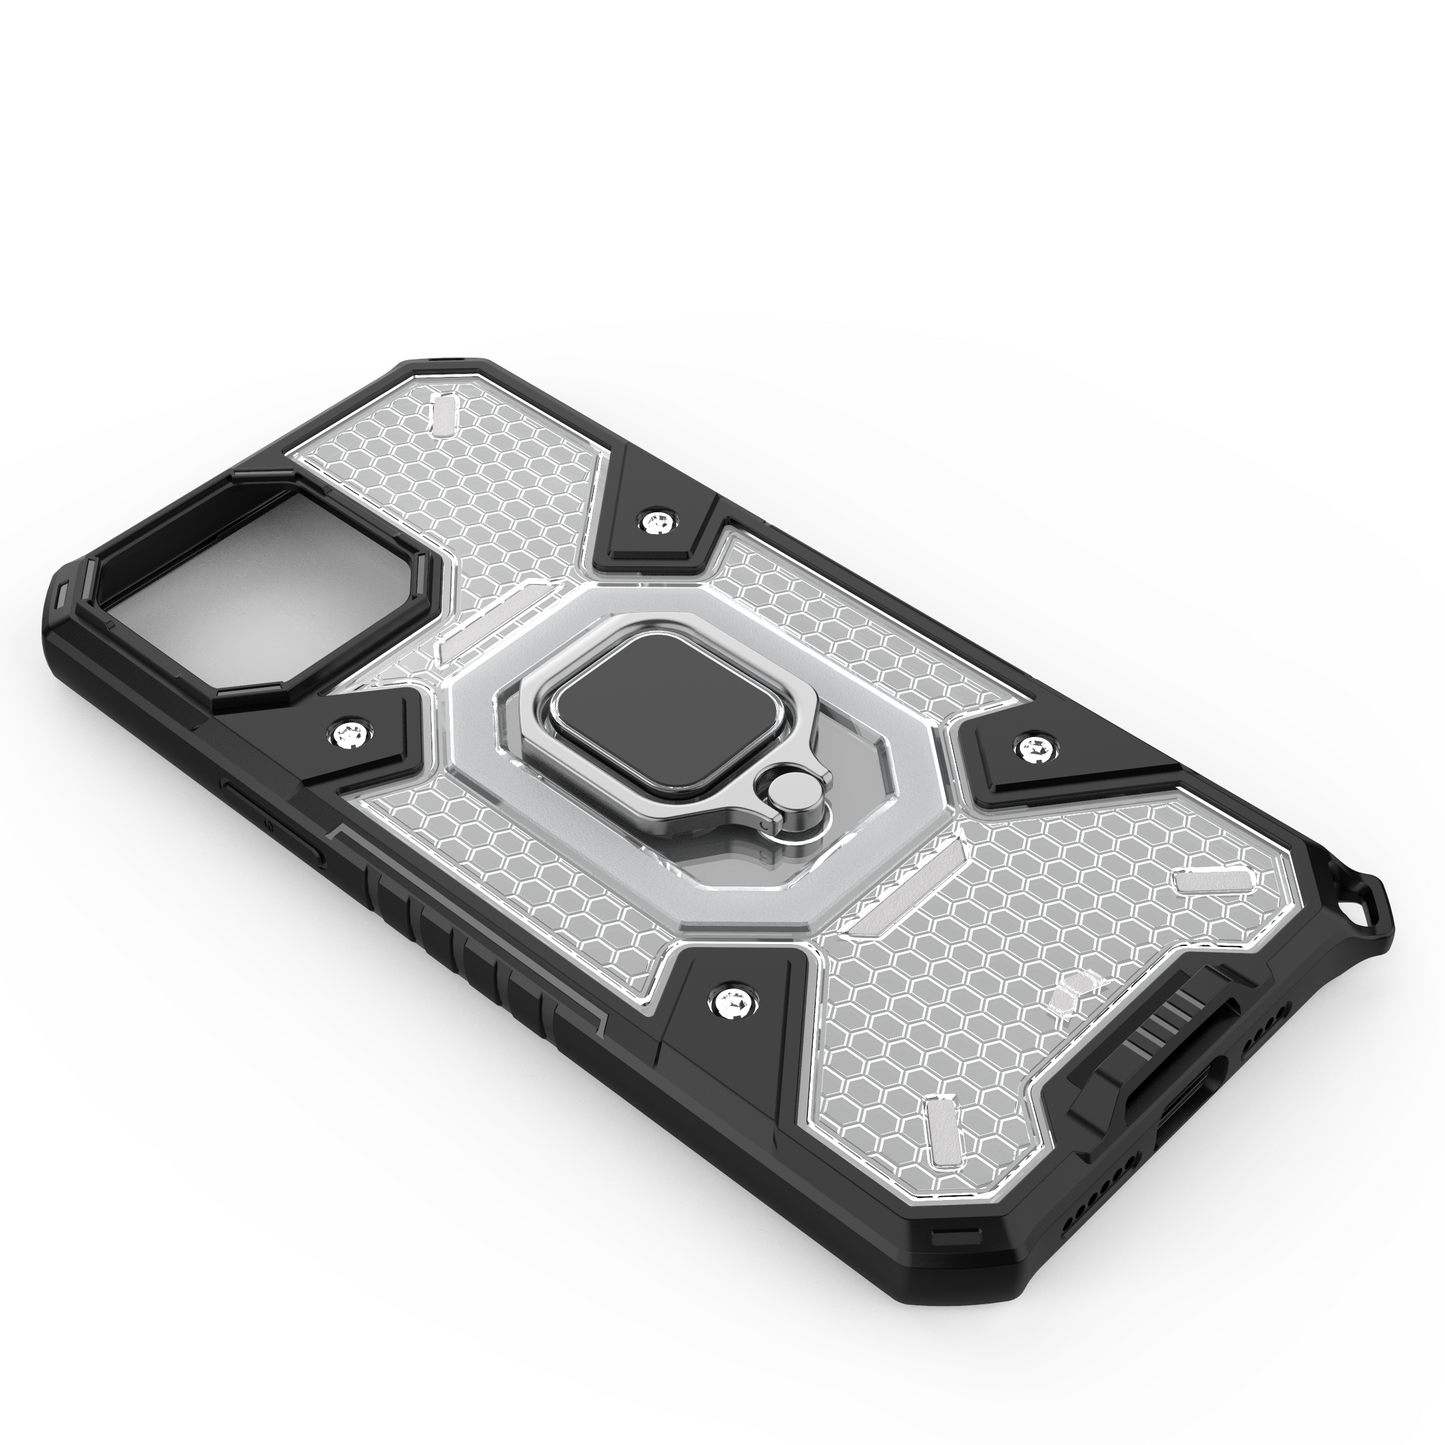 Space Capsule Case For Iphone